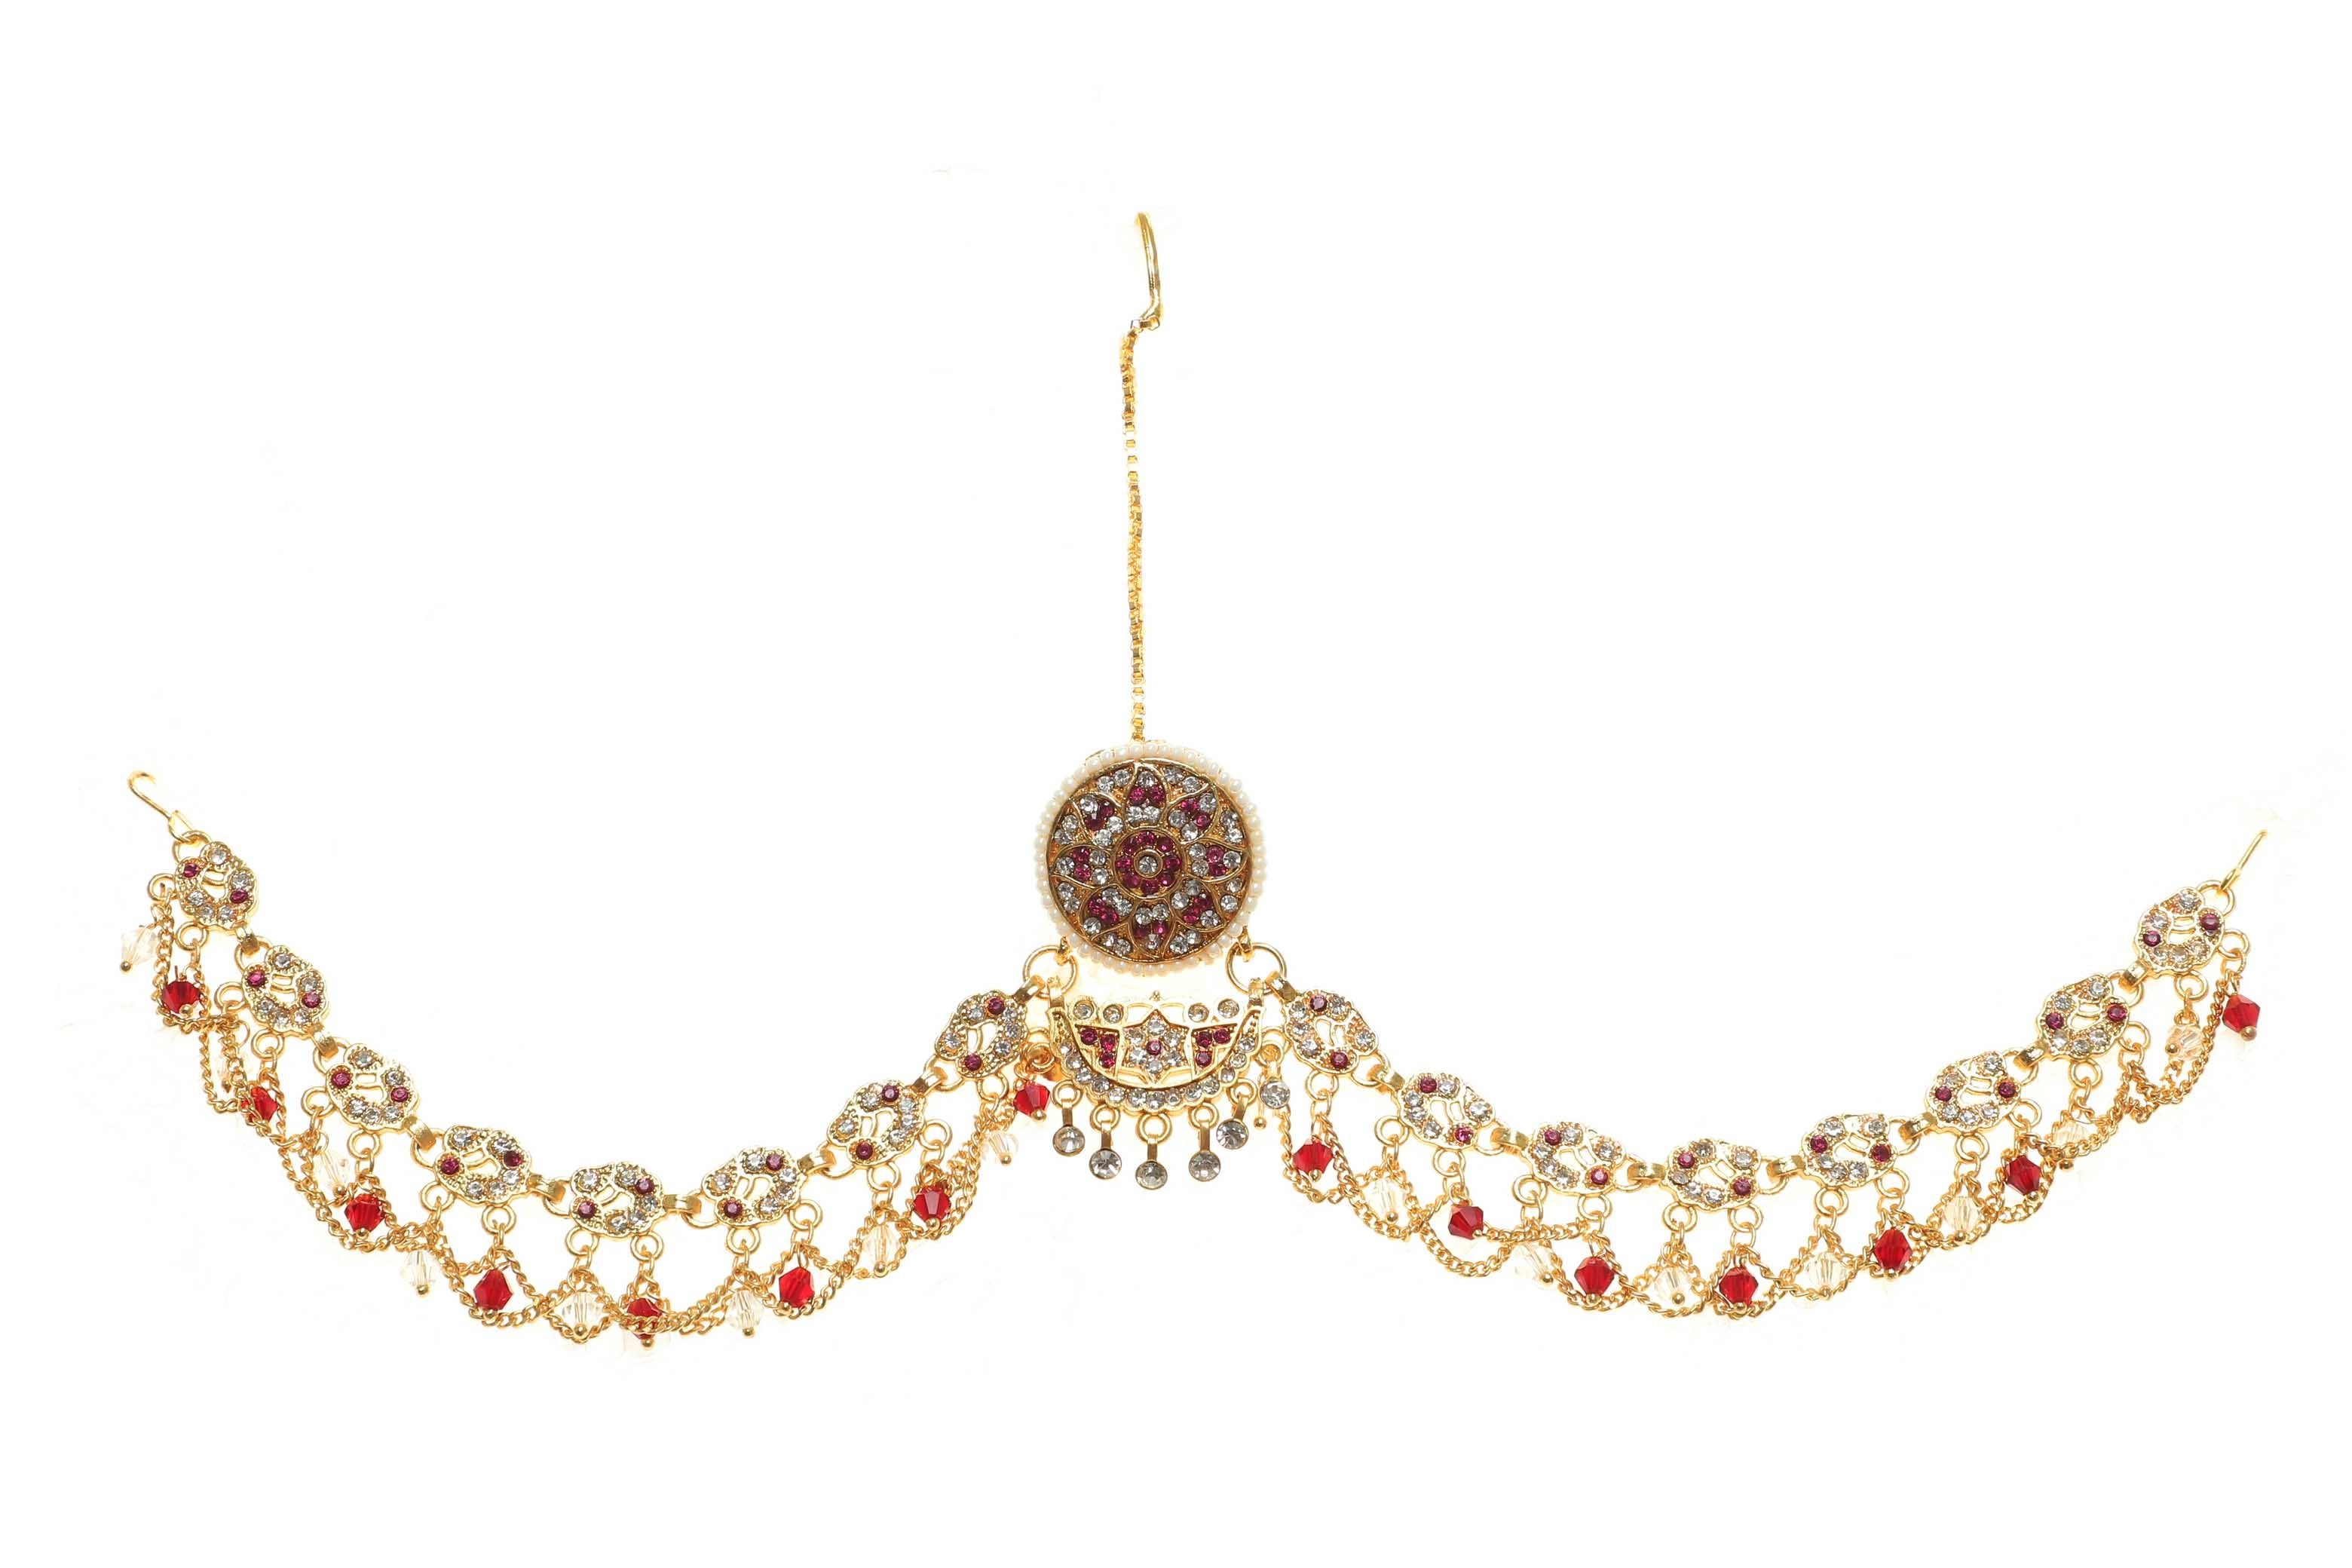 Indian Jewellery from Meira Jewellery:Rajasthani Jewellery,Traditional Rajasthani Multy colored Rakhdi Bor With AD Stones